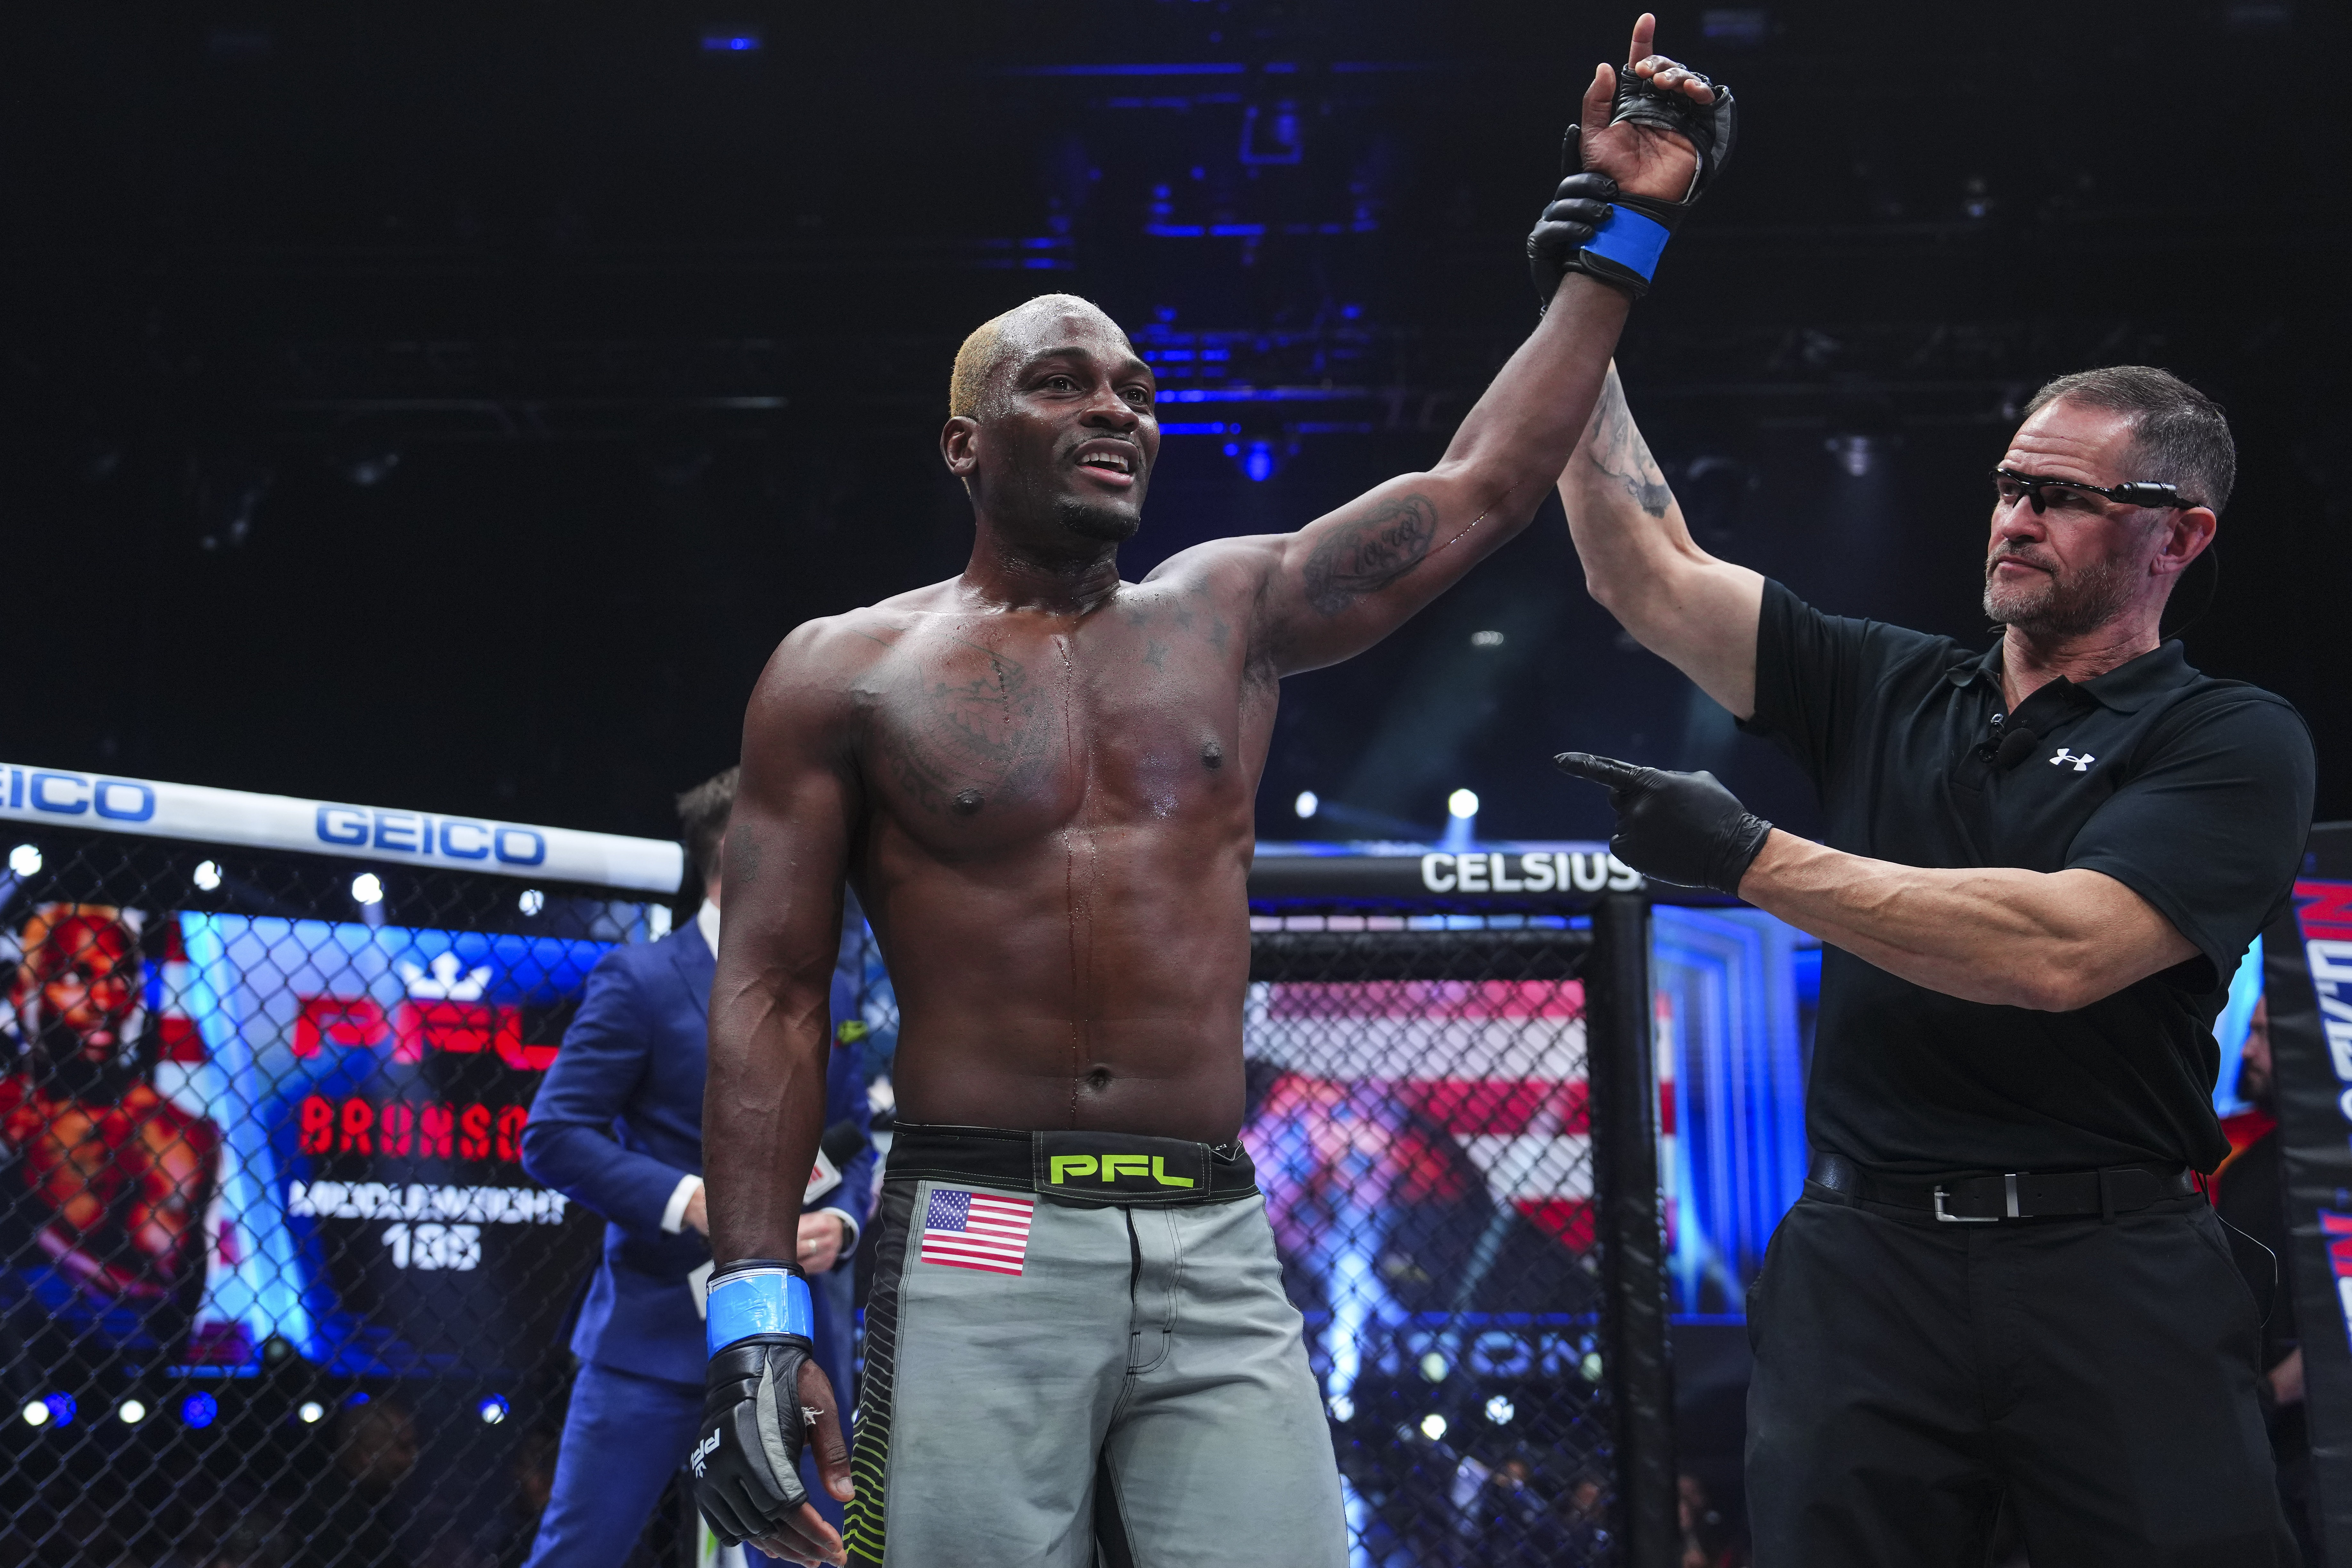 After dominant PFL debut, what does the future hold for Derek Brunson?